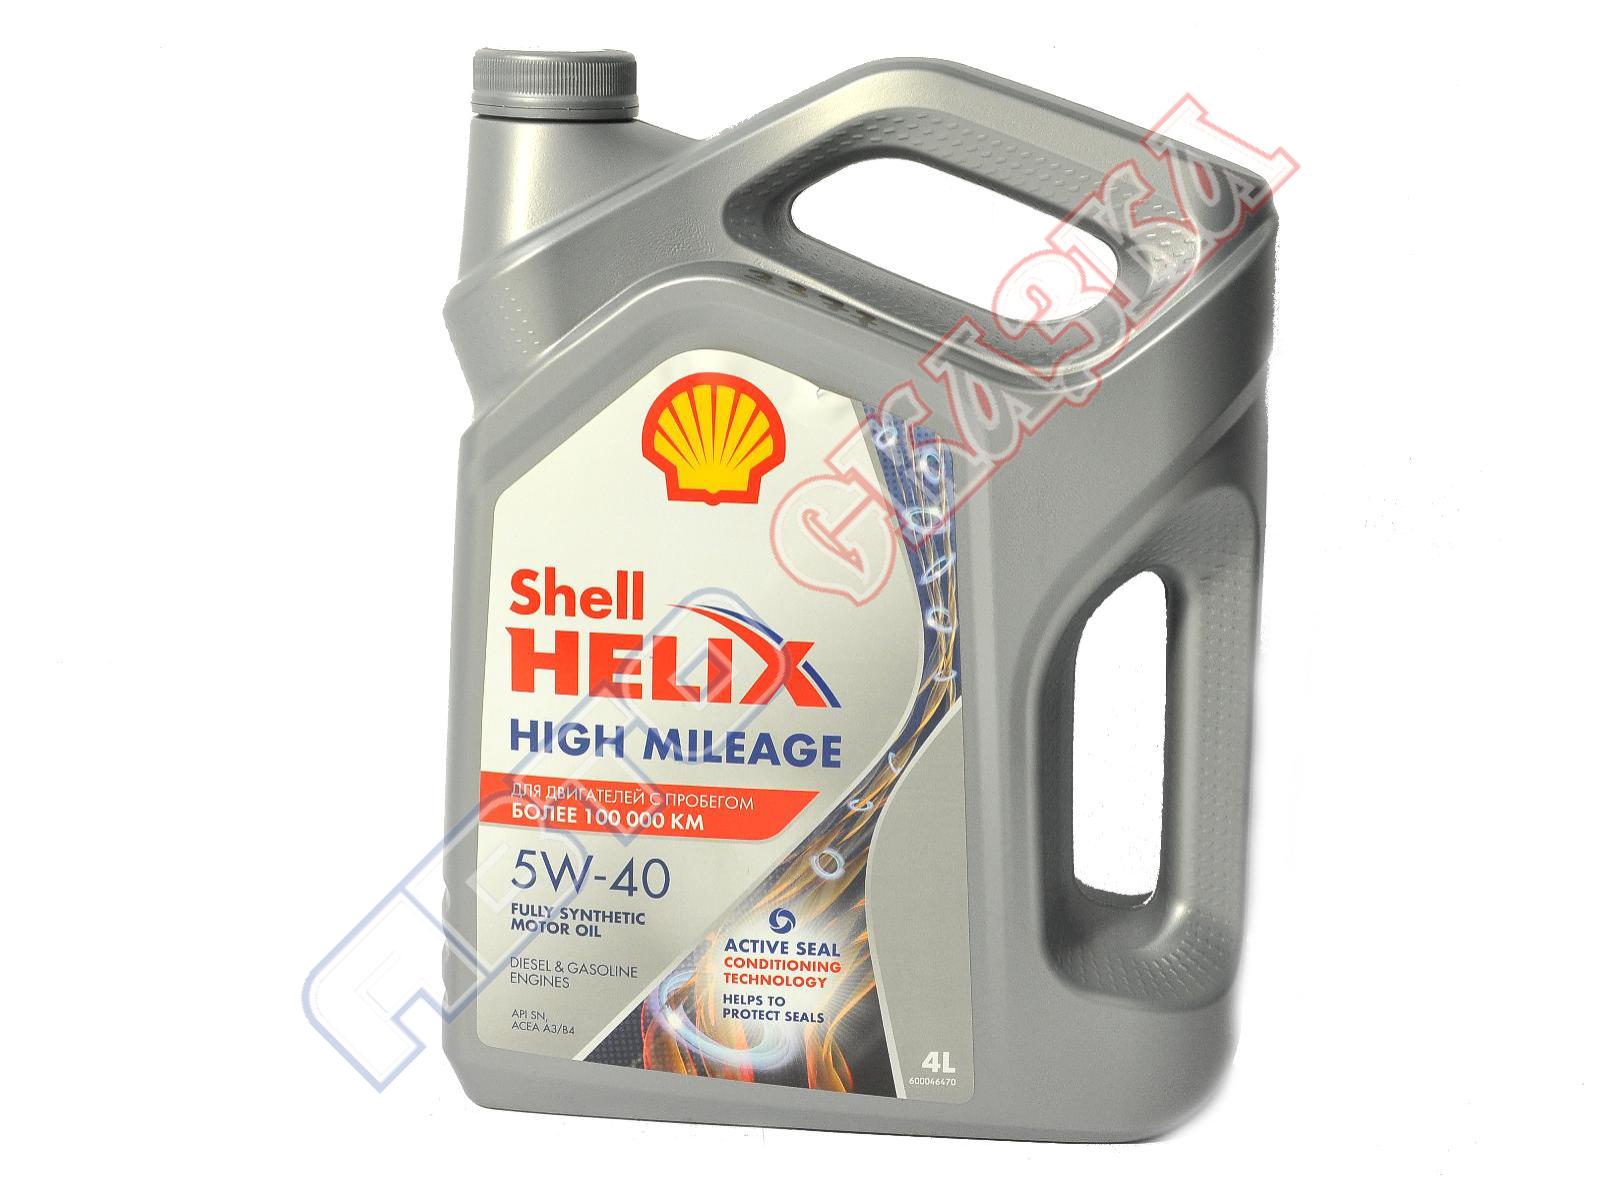 Масло Shell Helix Mileage 5w-40.. Shell Helix High Mileage 5w-40. 550050425 Shell. Shell Mileage 5w40 в Солярис. High mileage 5w 40